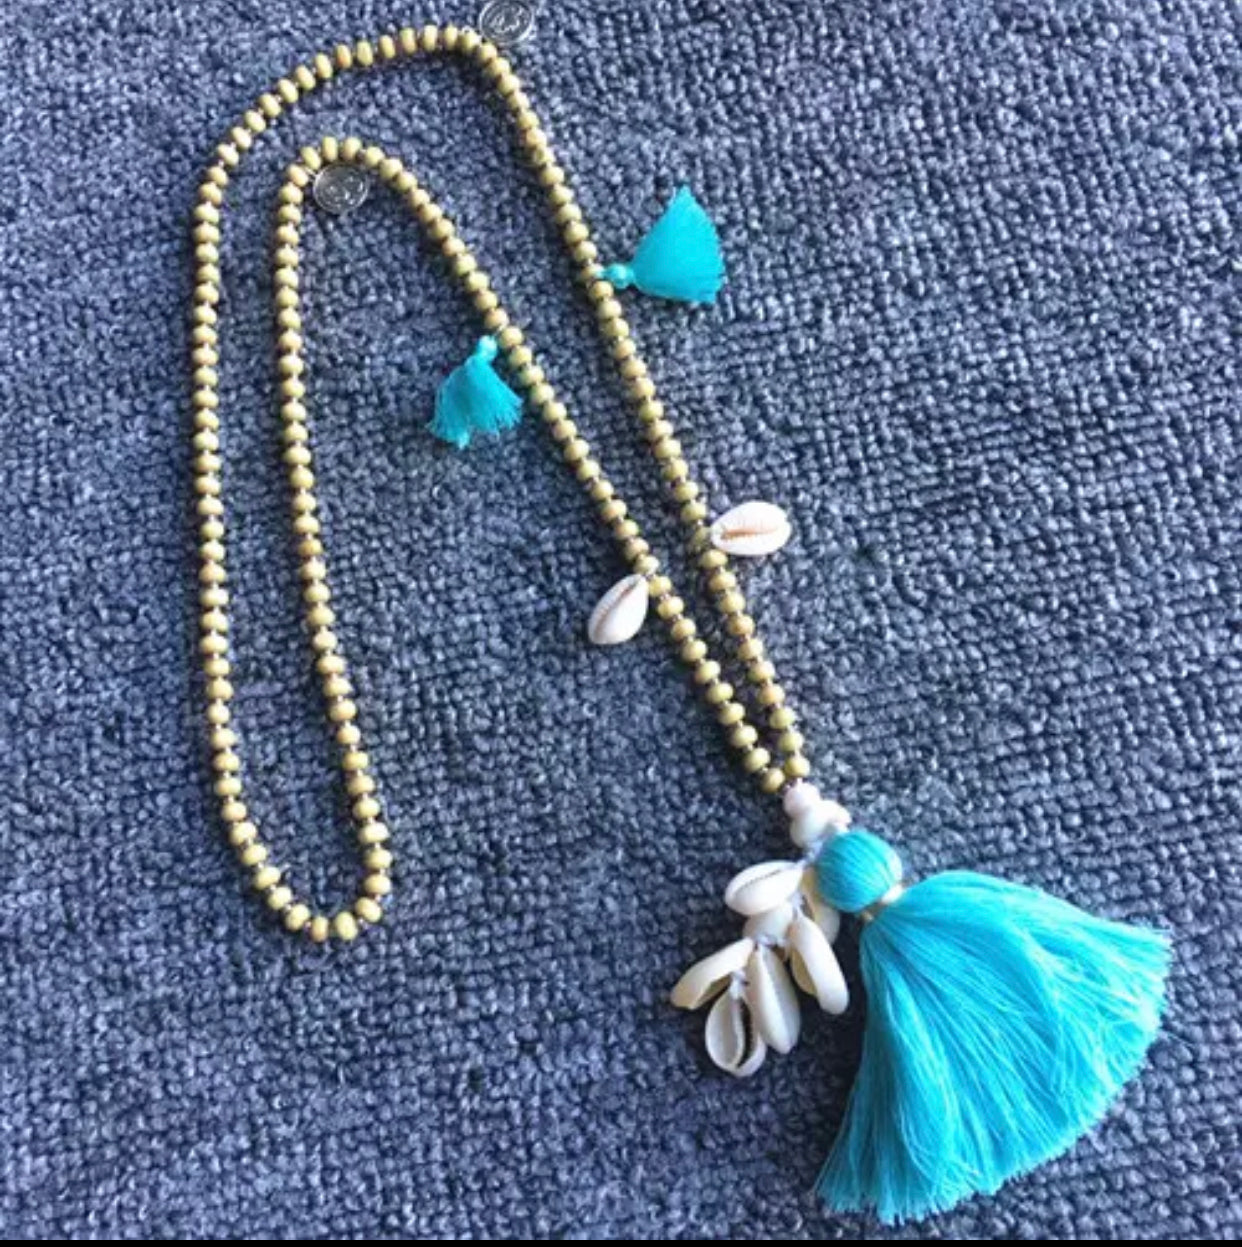 Wooden Beads Necklace with Cowry Shells and Turquoise Cotton Tassels